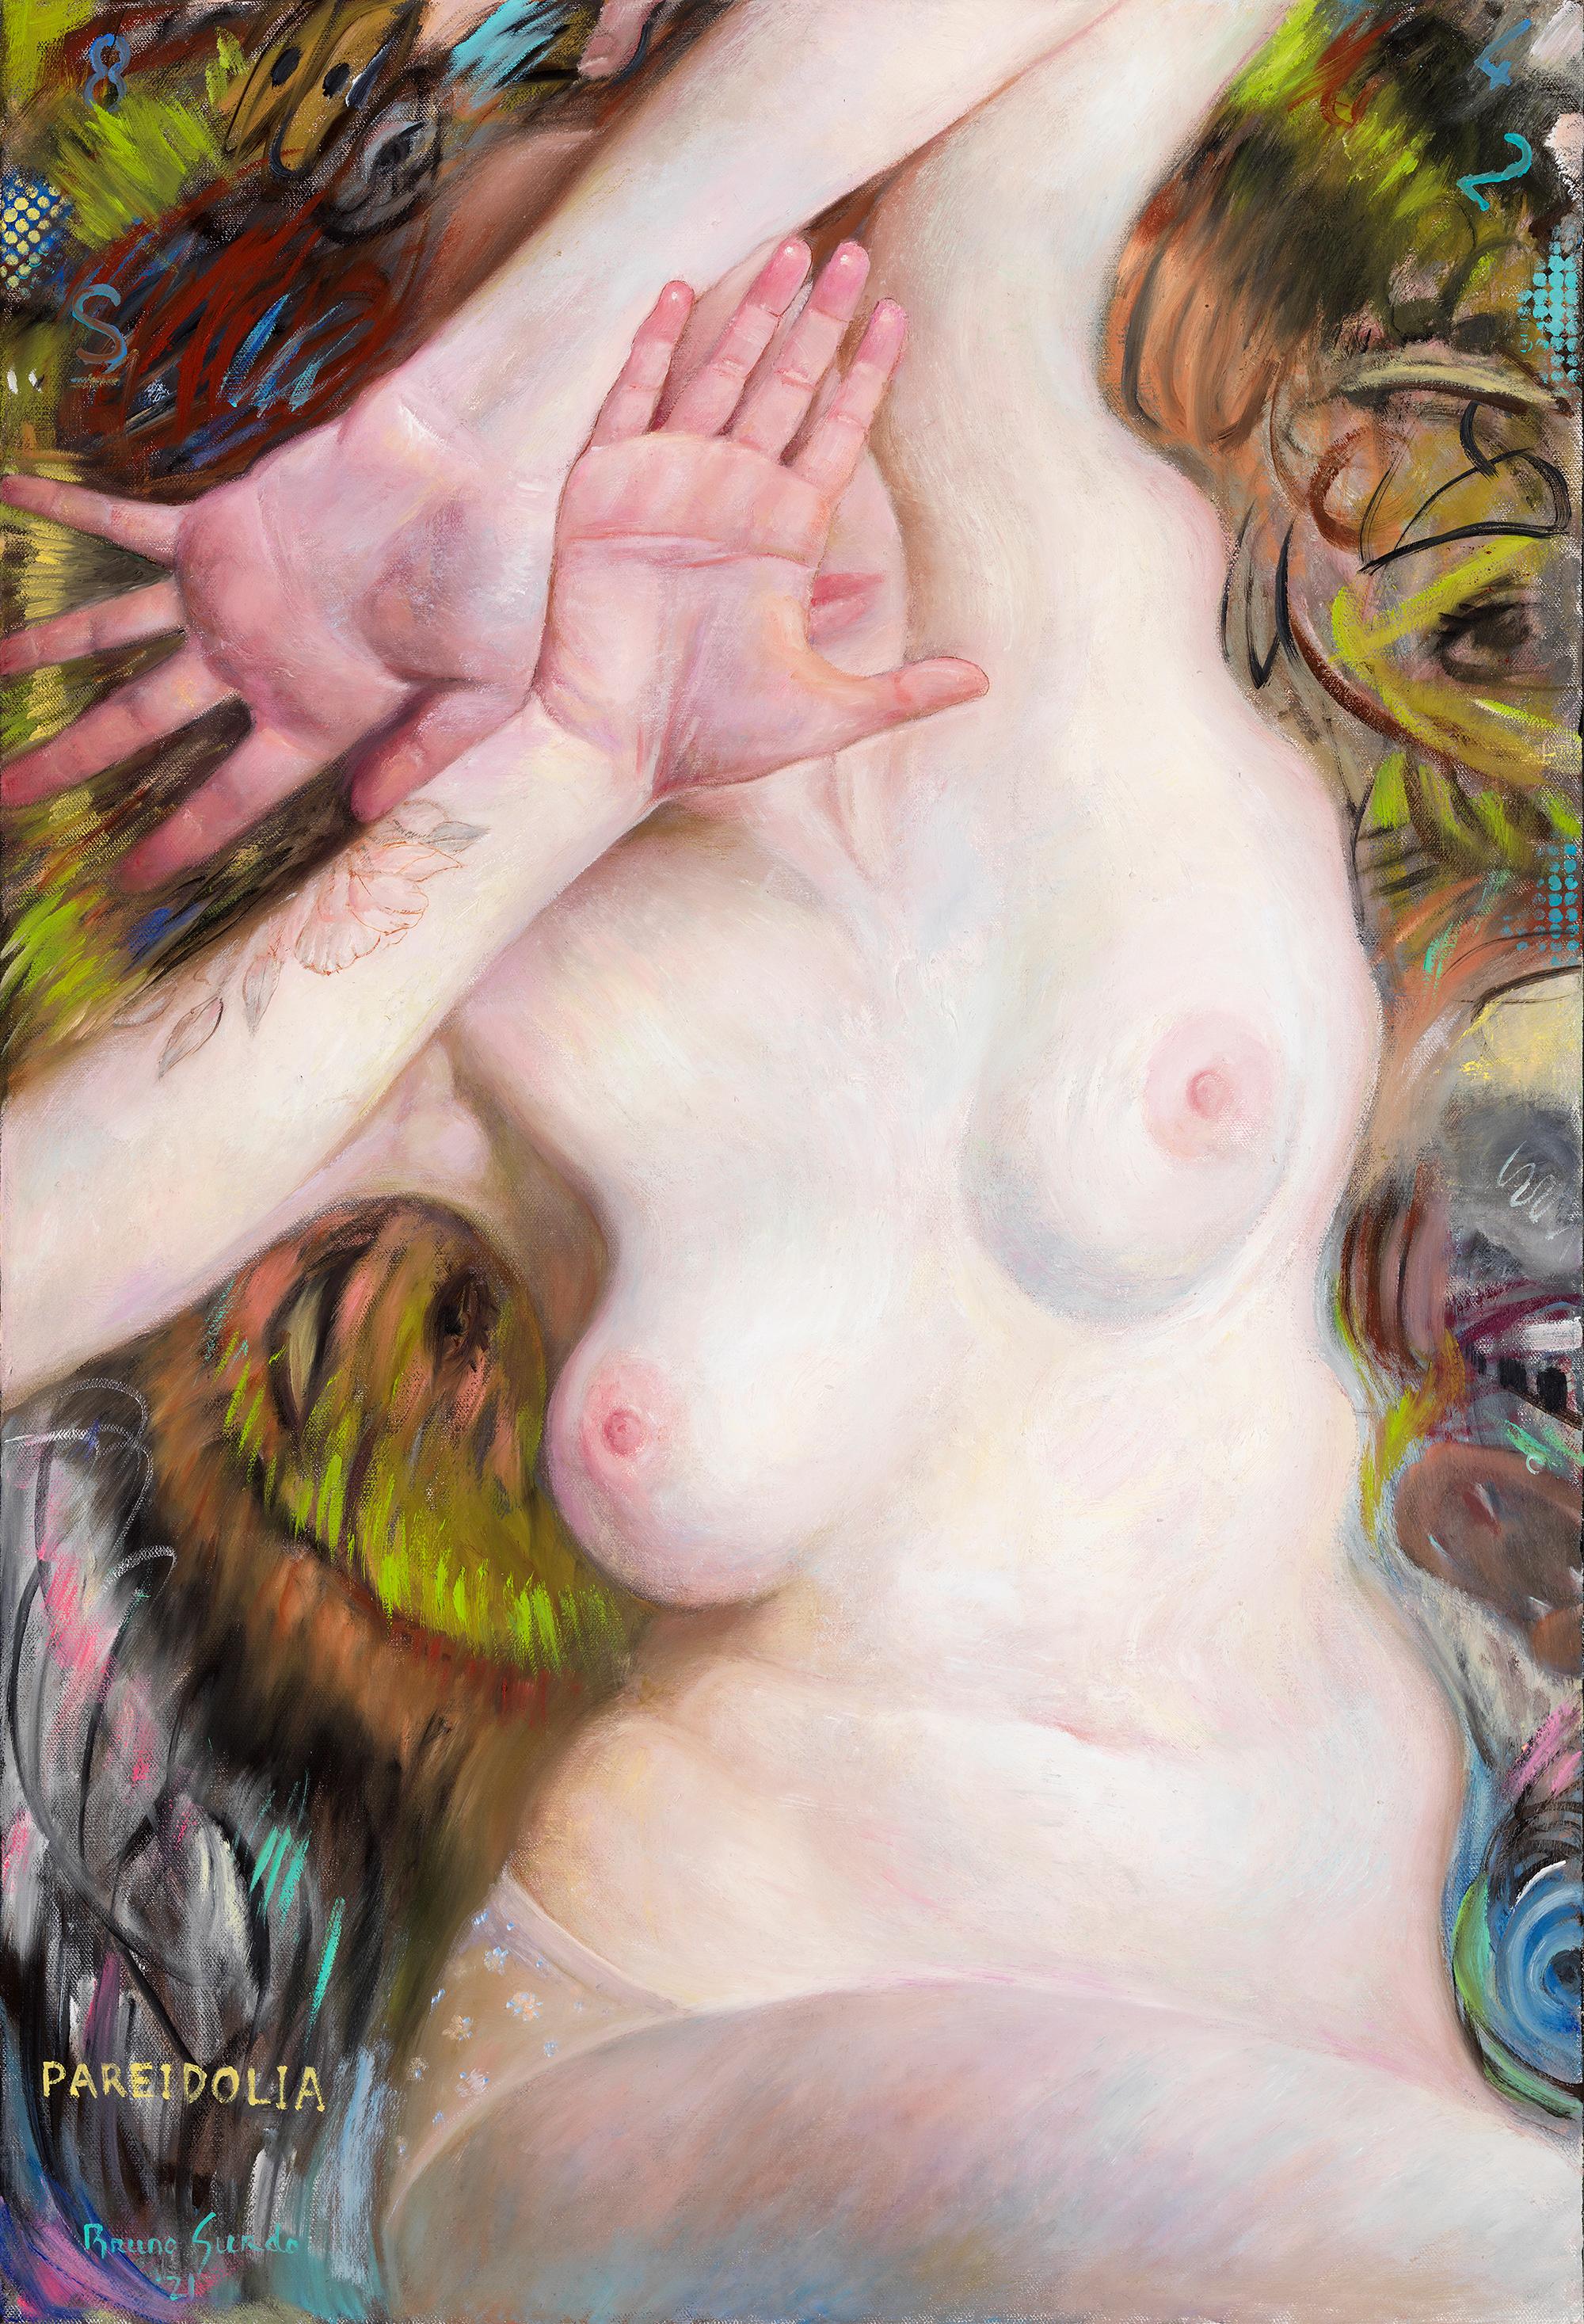 Bruno Surdo Figurative Painting - Pareidolia  - Distorted Female Nude, Hands Covering Her Face, Oil on Panel